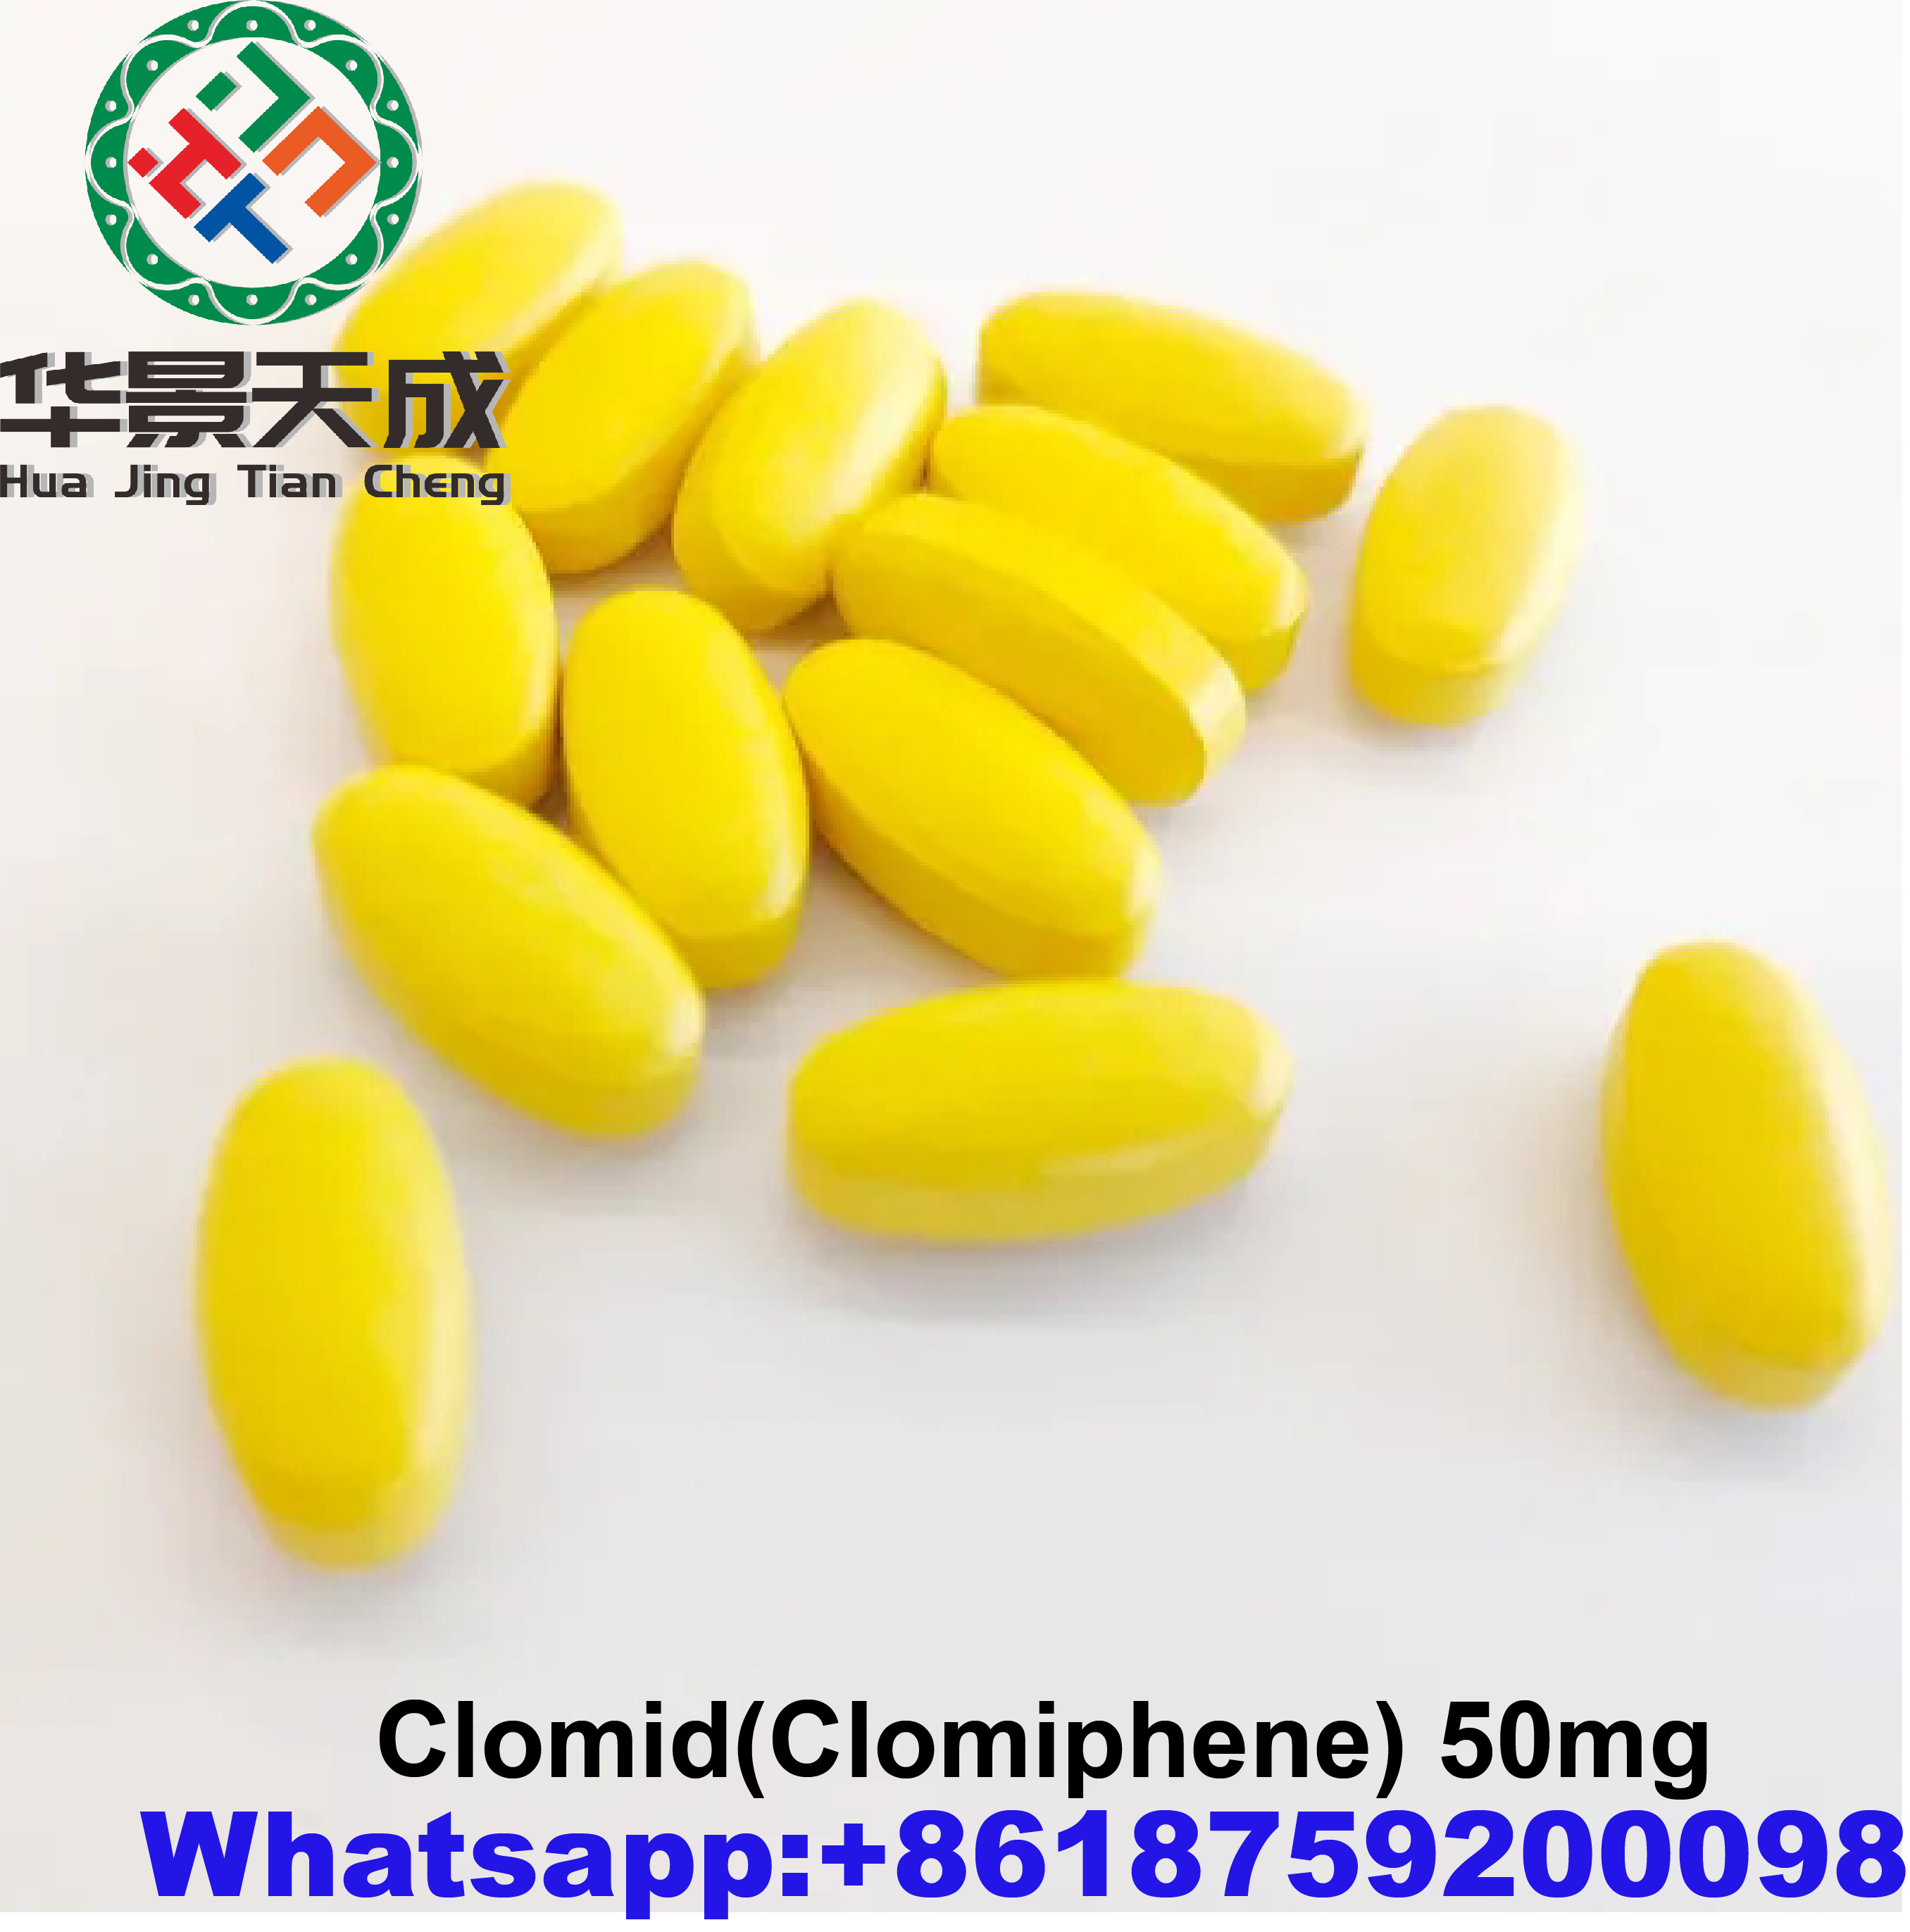 Clomid Factory Supply Clomiphene 50mg 100 pic/bottle Steroids Pills for Bodybuilding